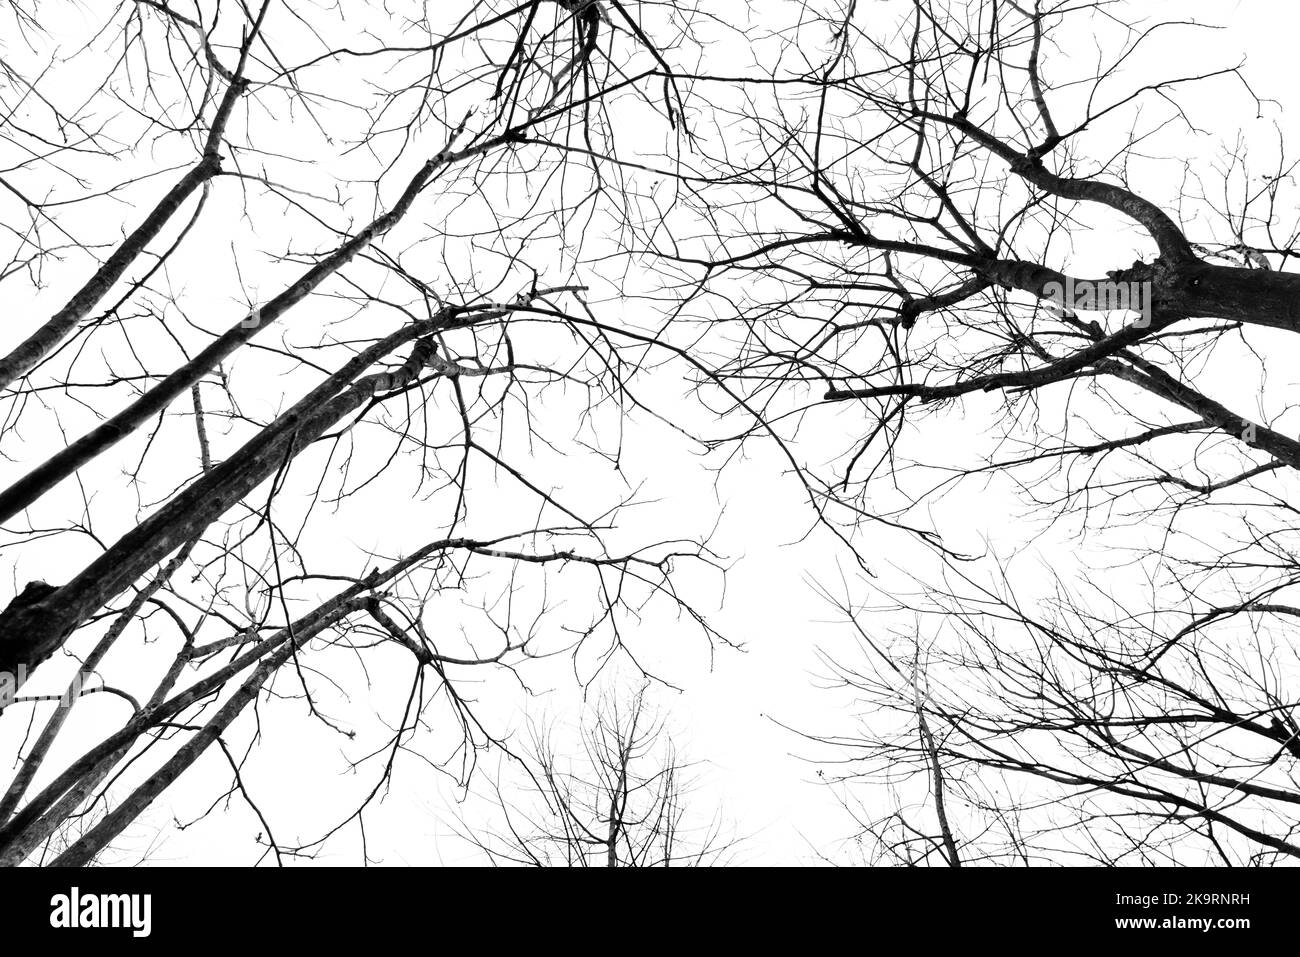 Looking up through a leafless trees silhouettes over winter sky Stock Photo